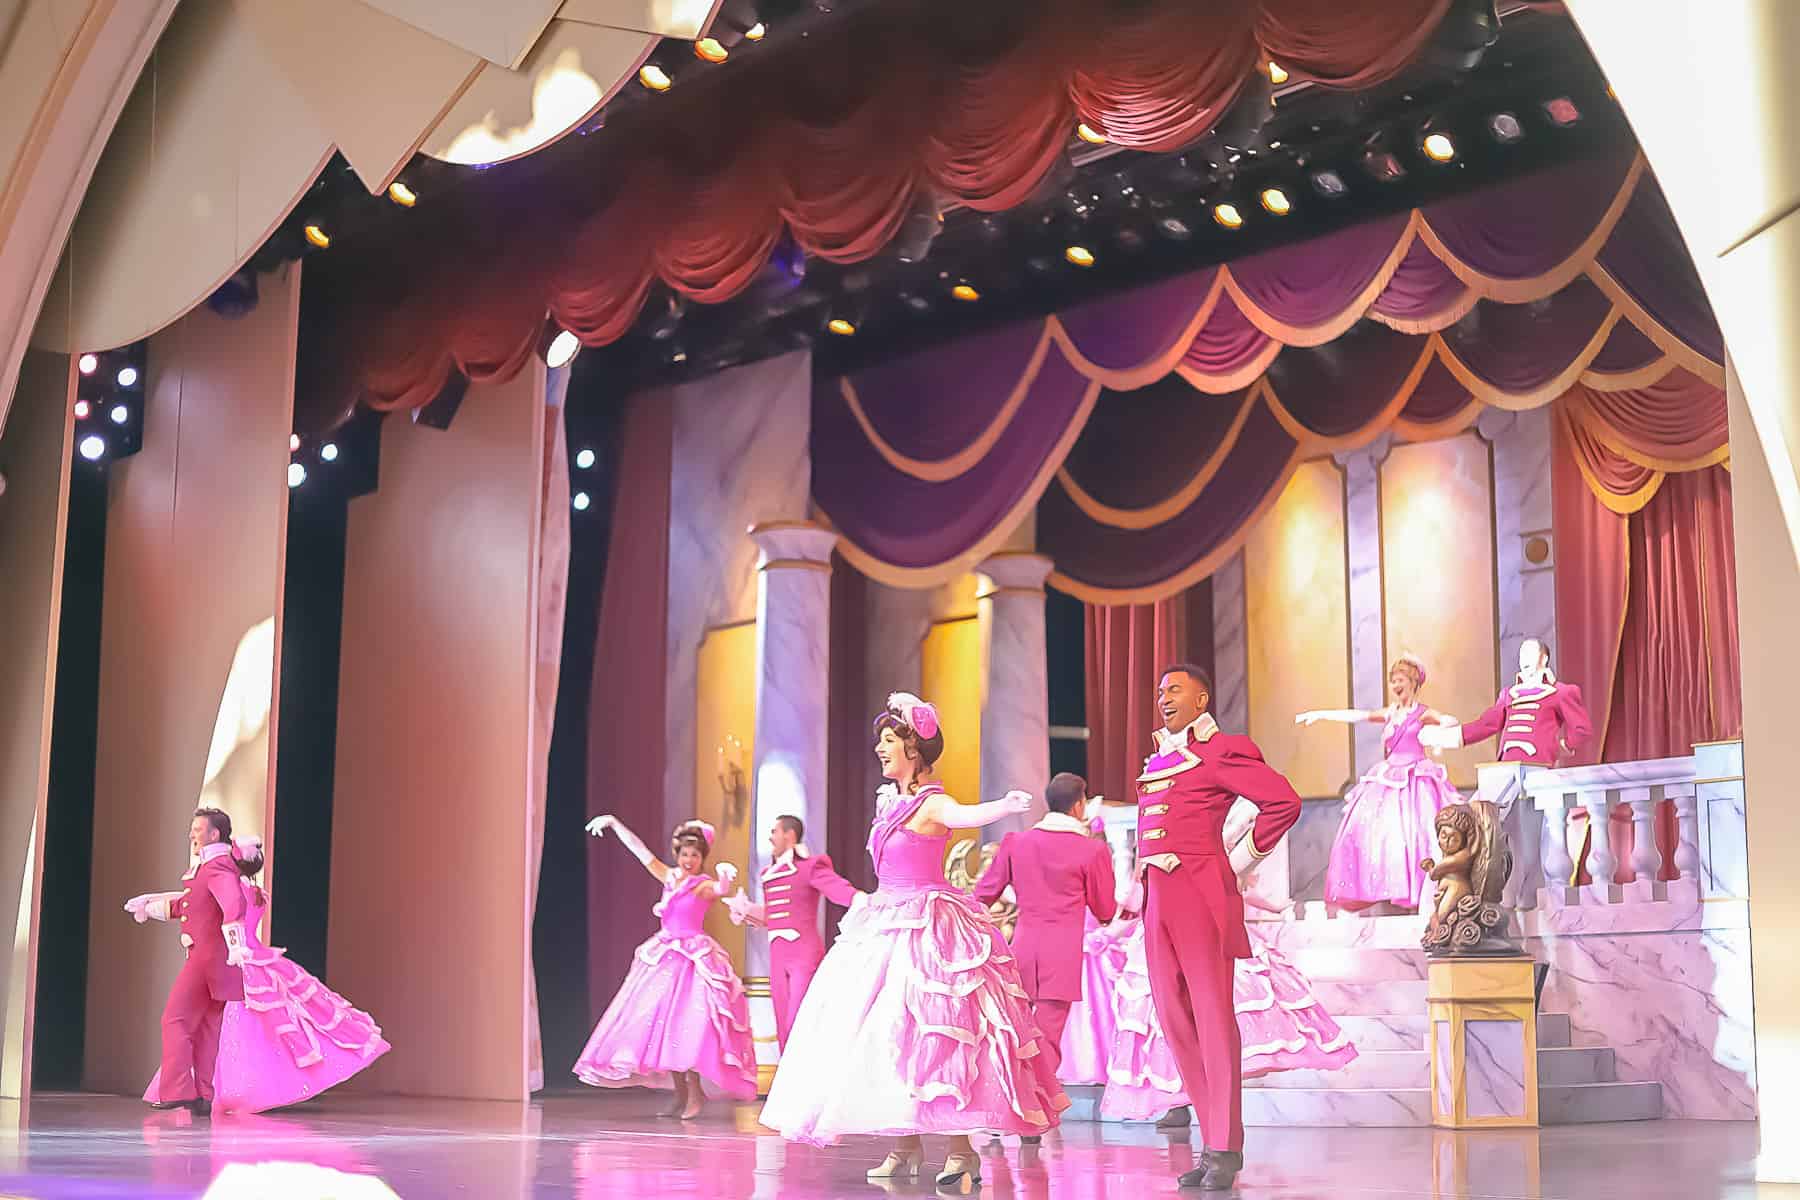 Finale Dancers at the ball await Belle and the Prince. 